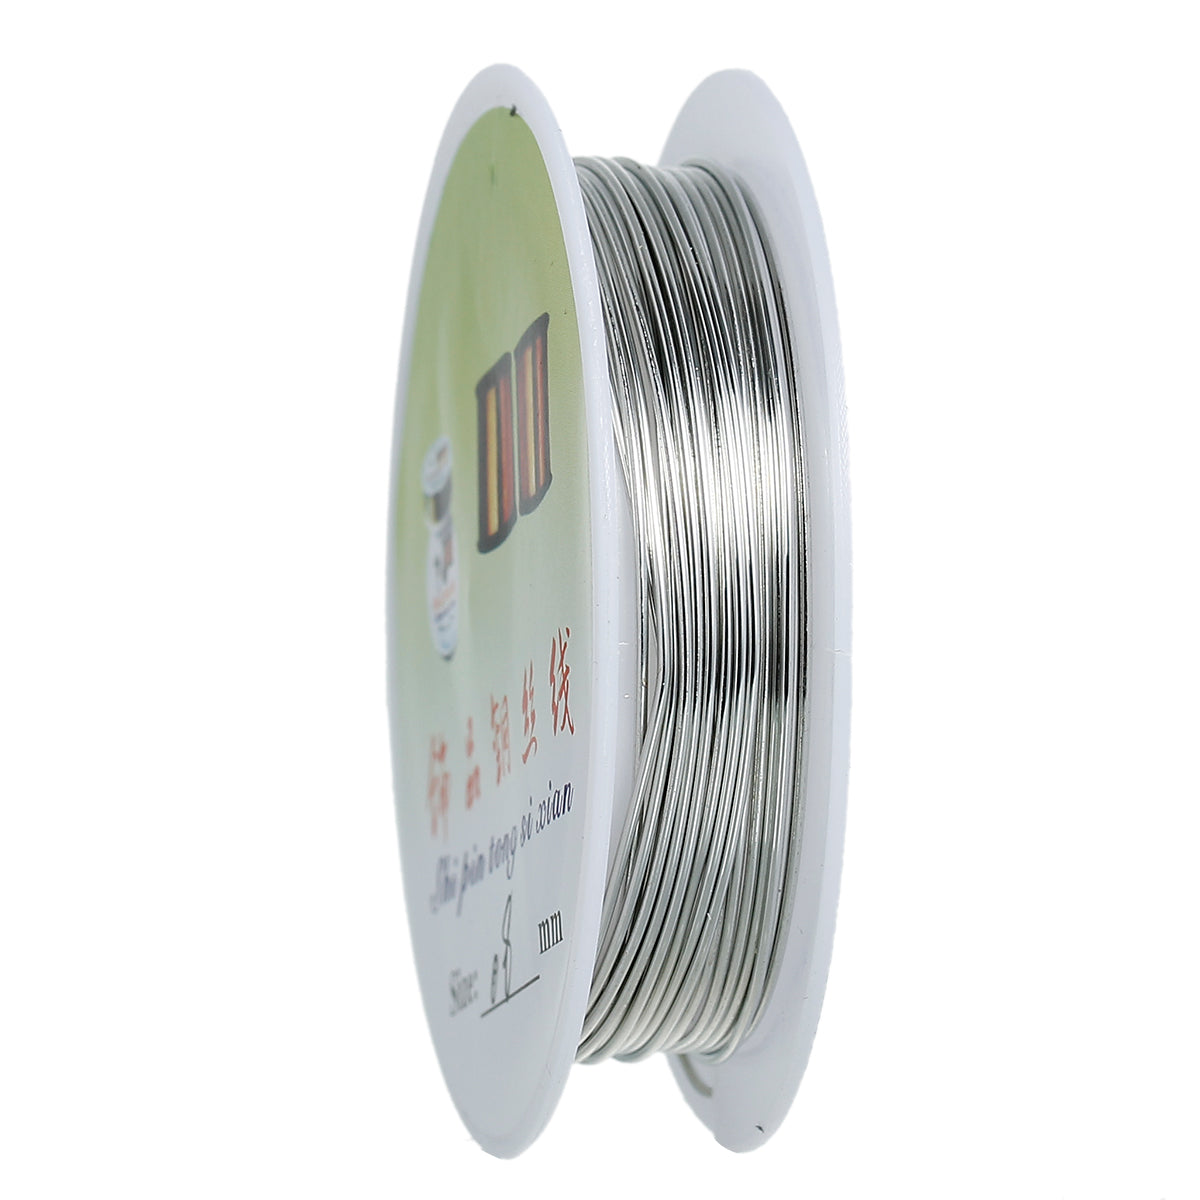 5 Rolls Copper Wire For Jewelry Making, Metal Copper Wire, Bendable, Flower  Making, For Jewelry Making And Crafts (0.3mm X 15m)